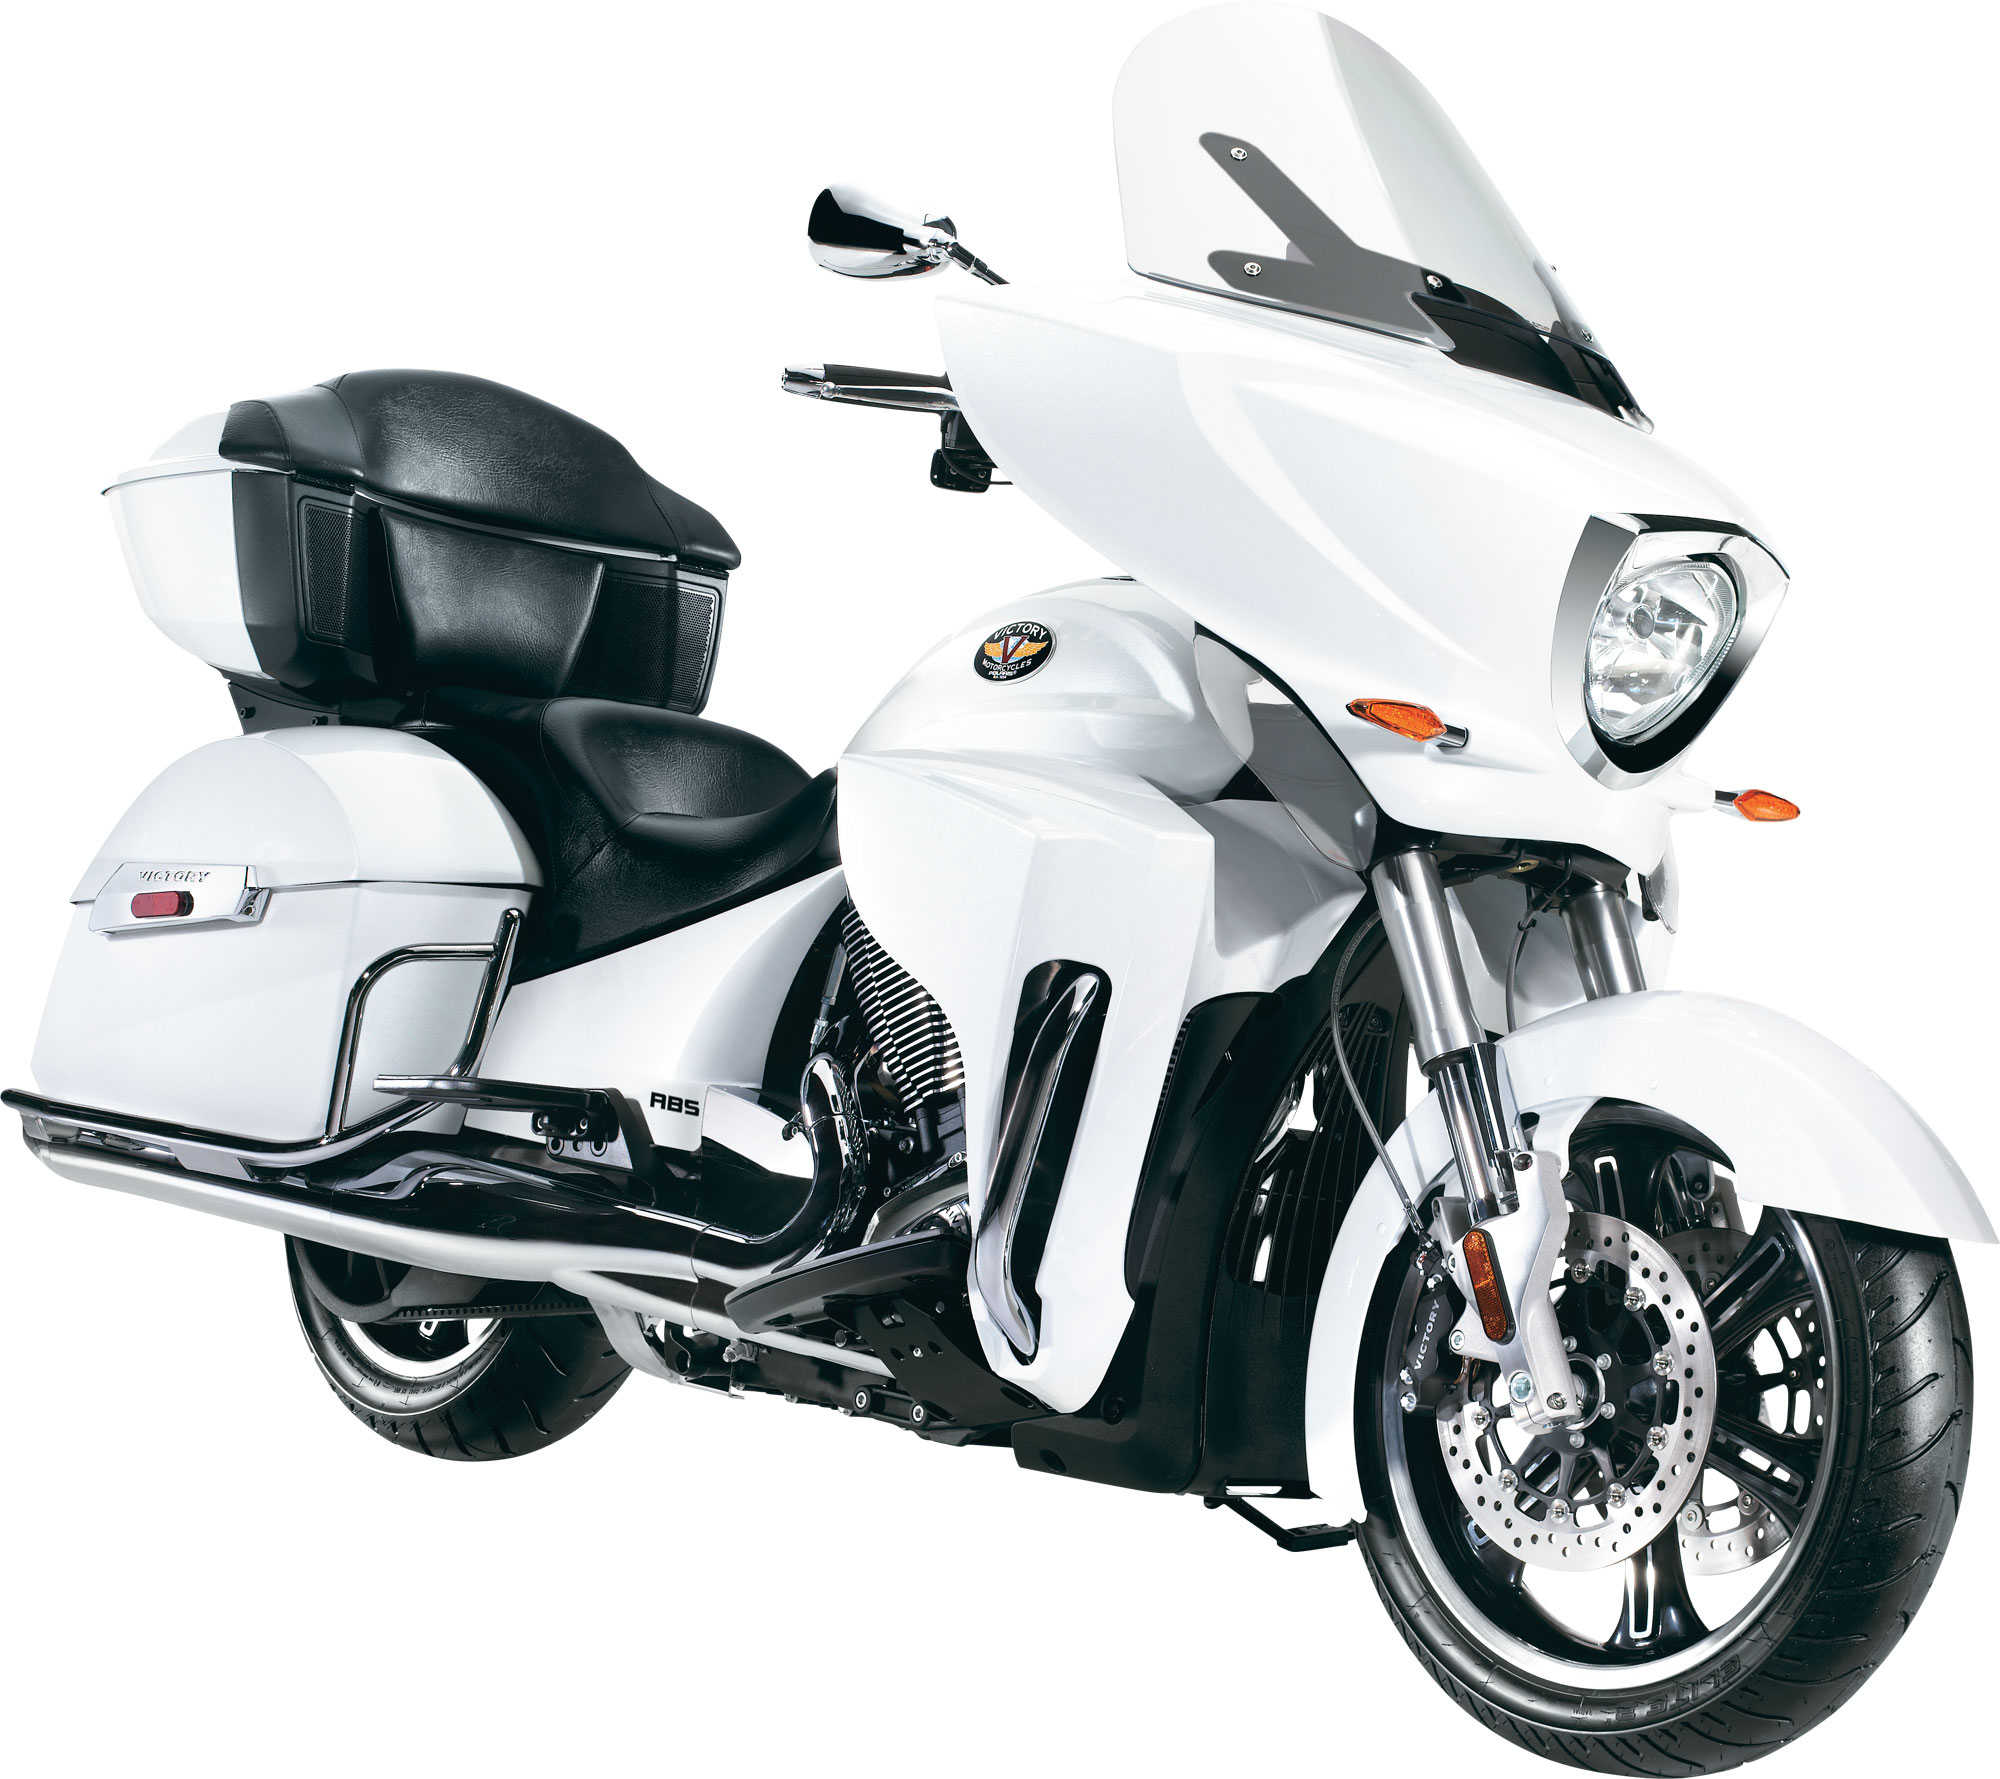 2011 victory cross country tour specs